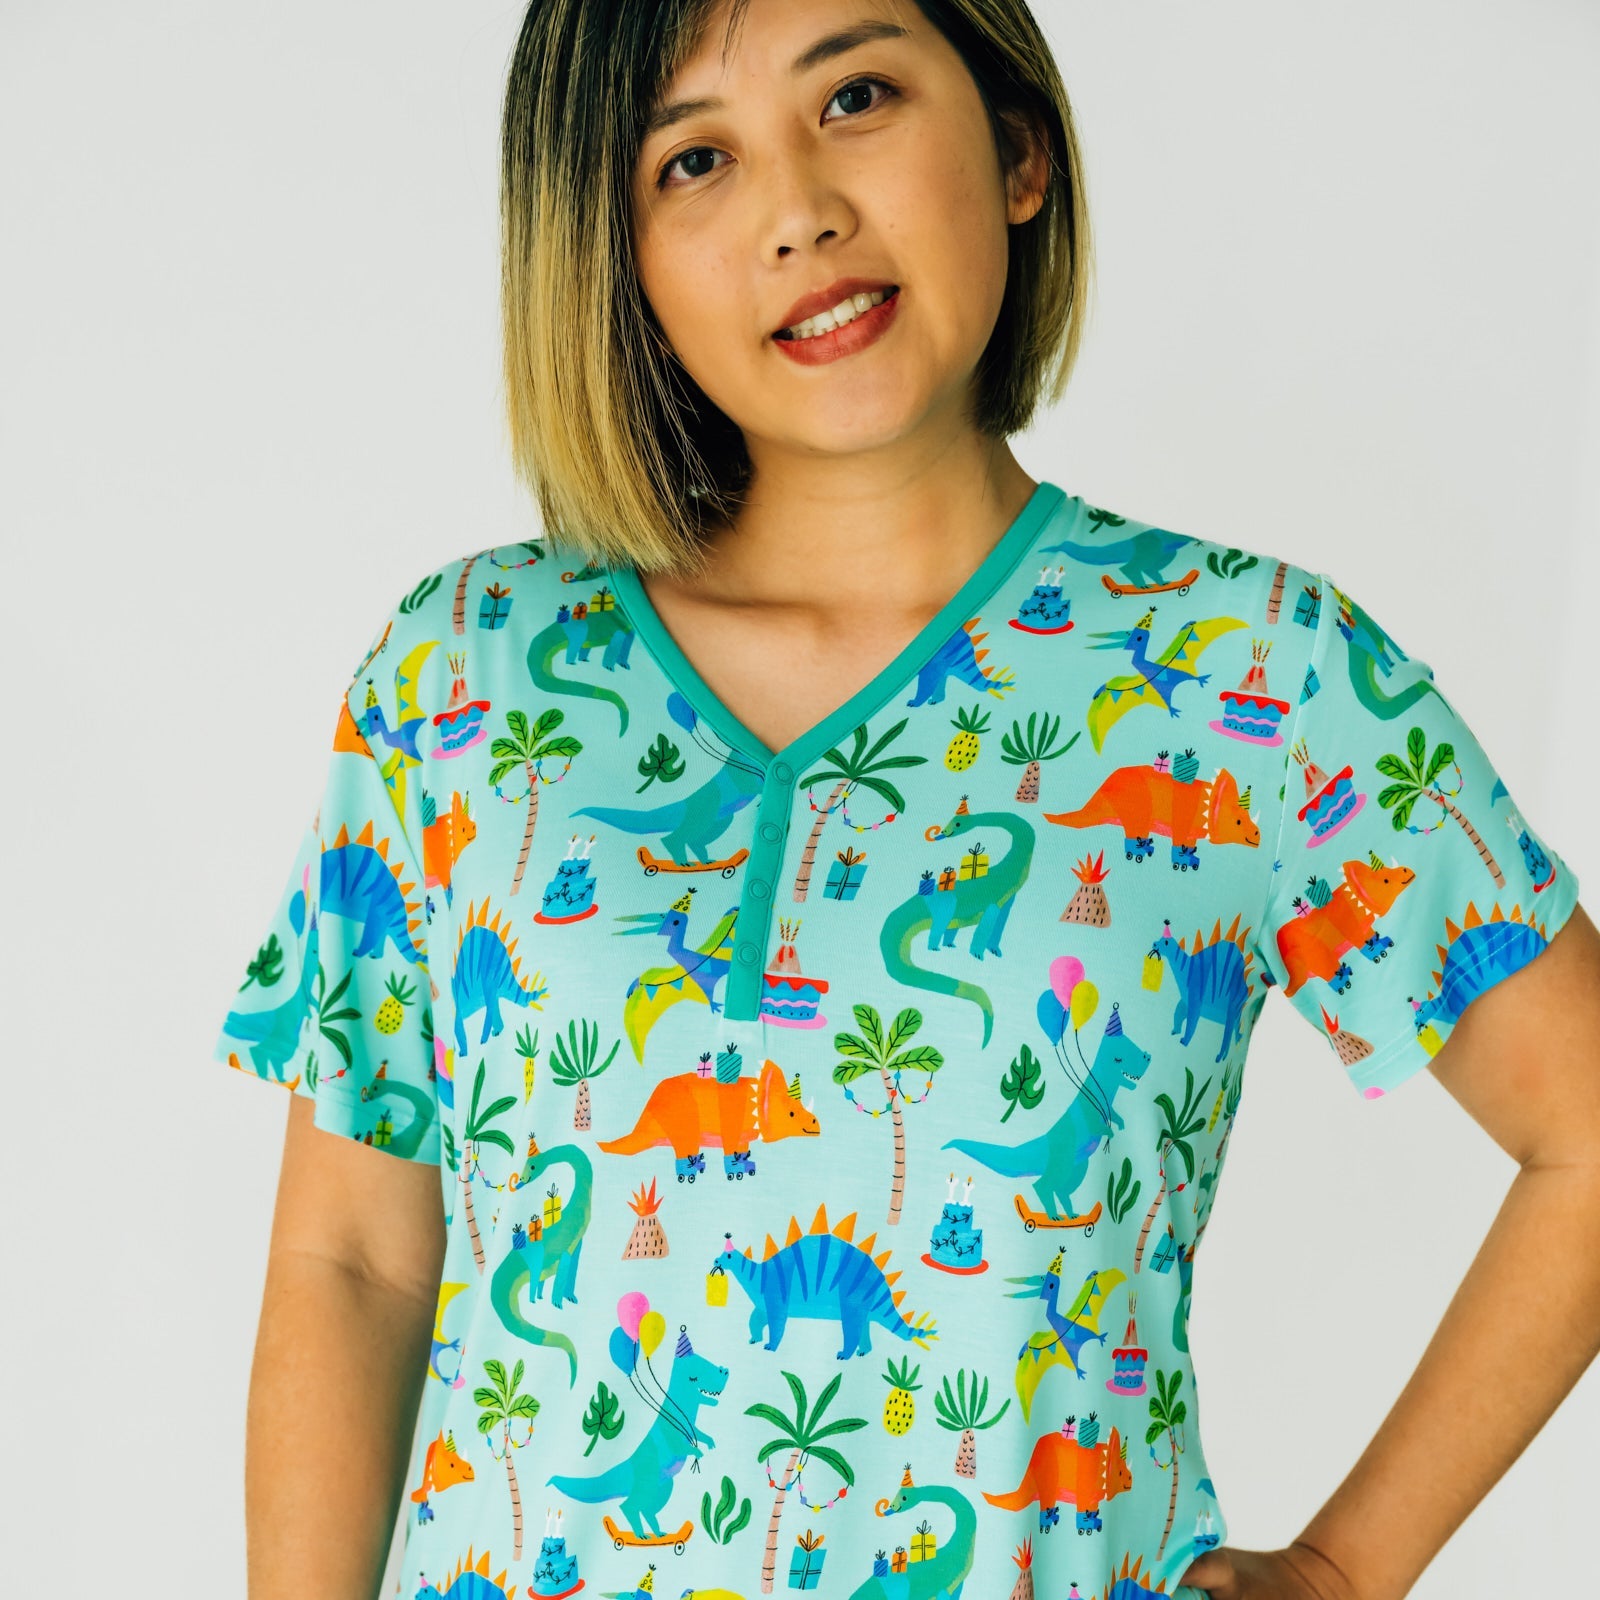 Close up image of a woman wearing a Prehistoric Party pj top